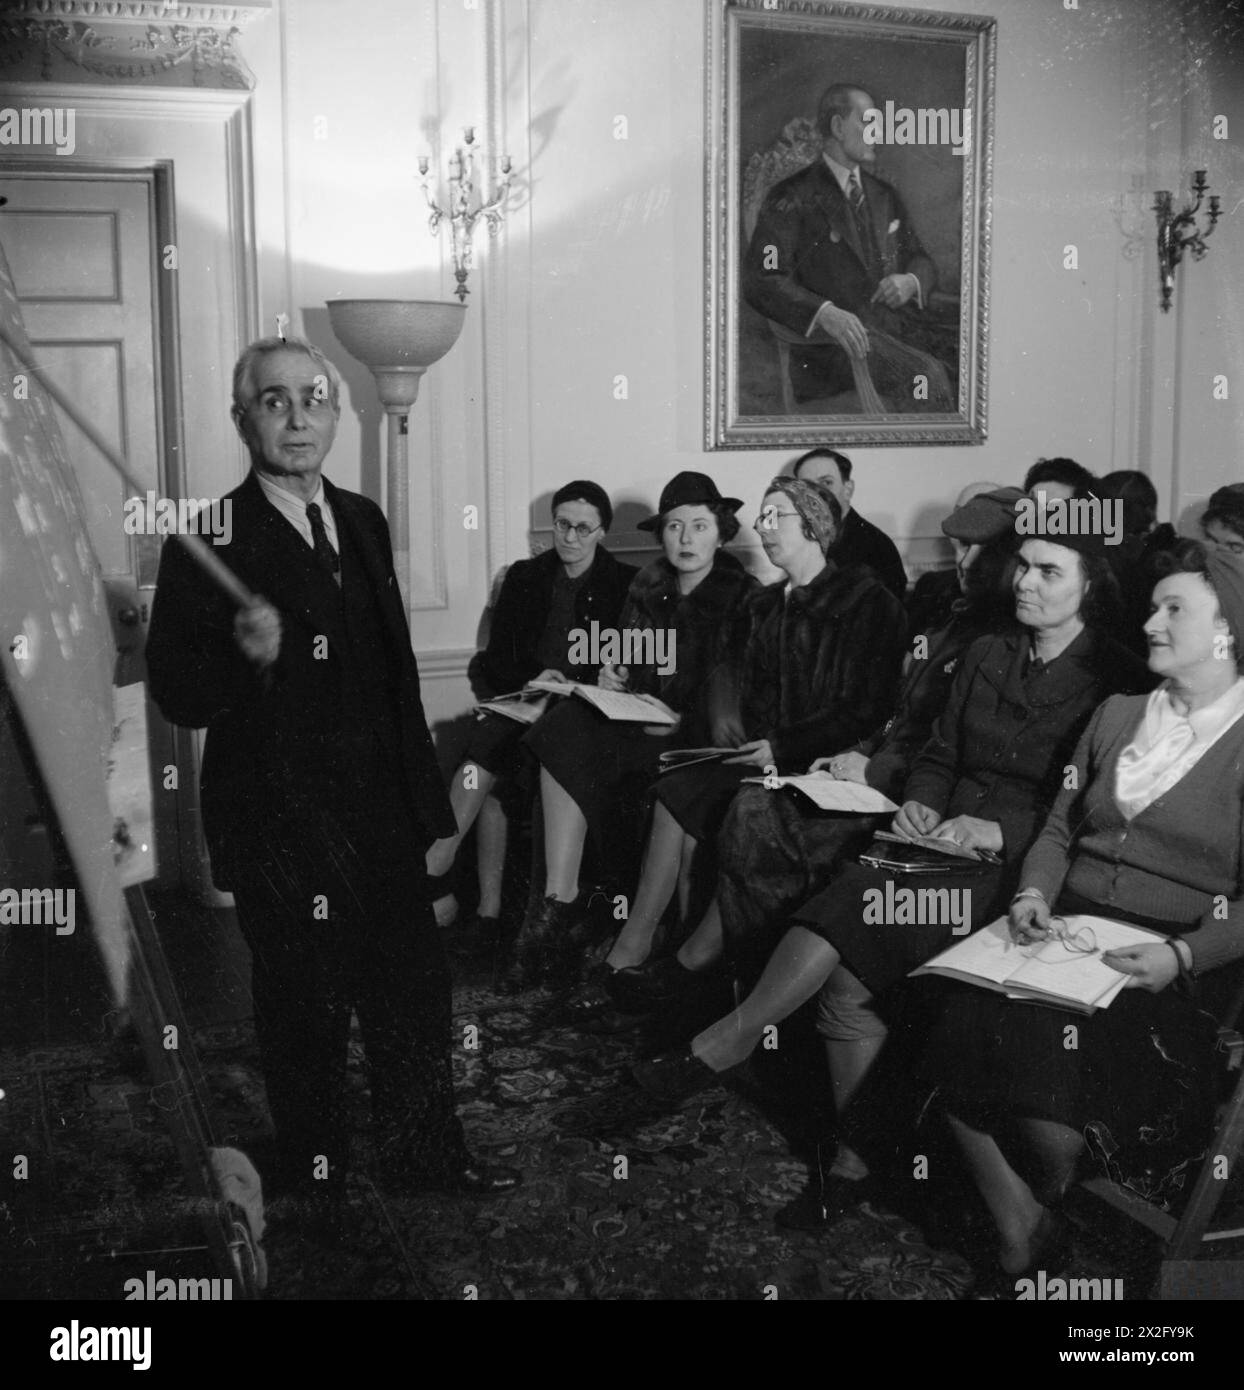 BRITONS LEARN TURKISH: ADULT EDUCATION IN LONDON, 1943 - Bay Ali Riza Sencan, Secretary of the Halkevi, points to the blackboard whilst teaching the class about the three different personal pronoun suffixes. The front row of the class listens intently to him. A portrait of Kemal Ataturk can be seen on the wall behind them. Turkish language classes are held here twice a week Stock Photo